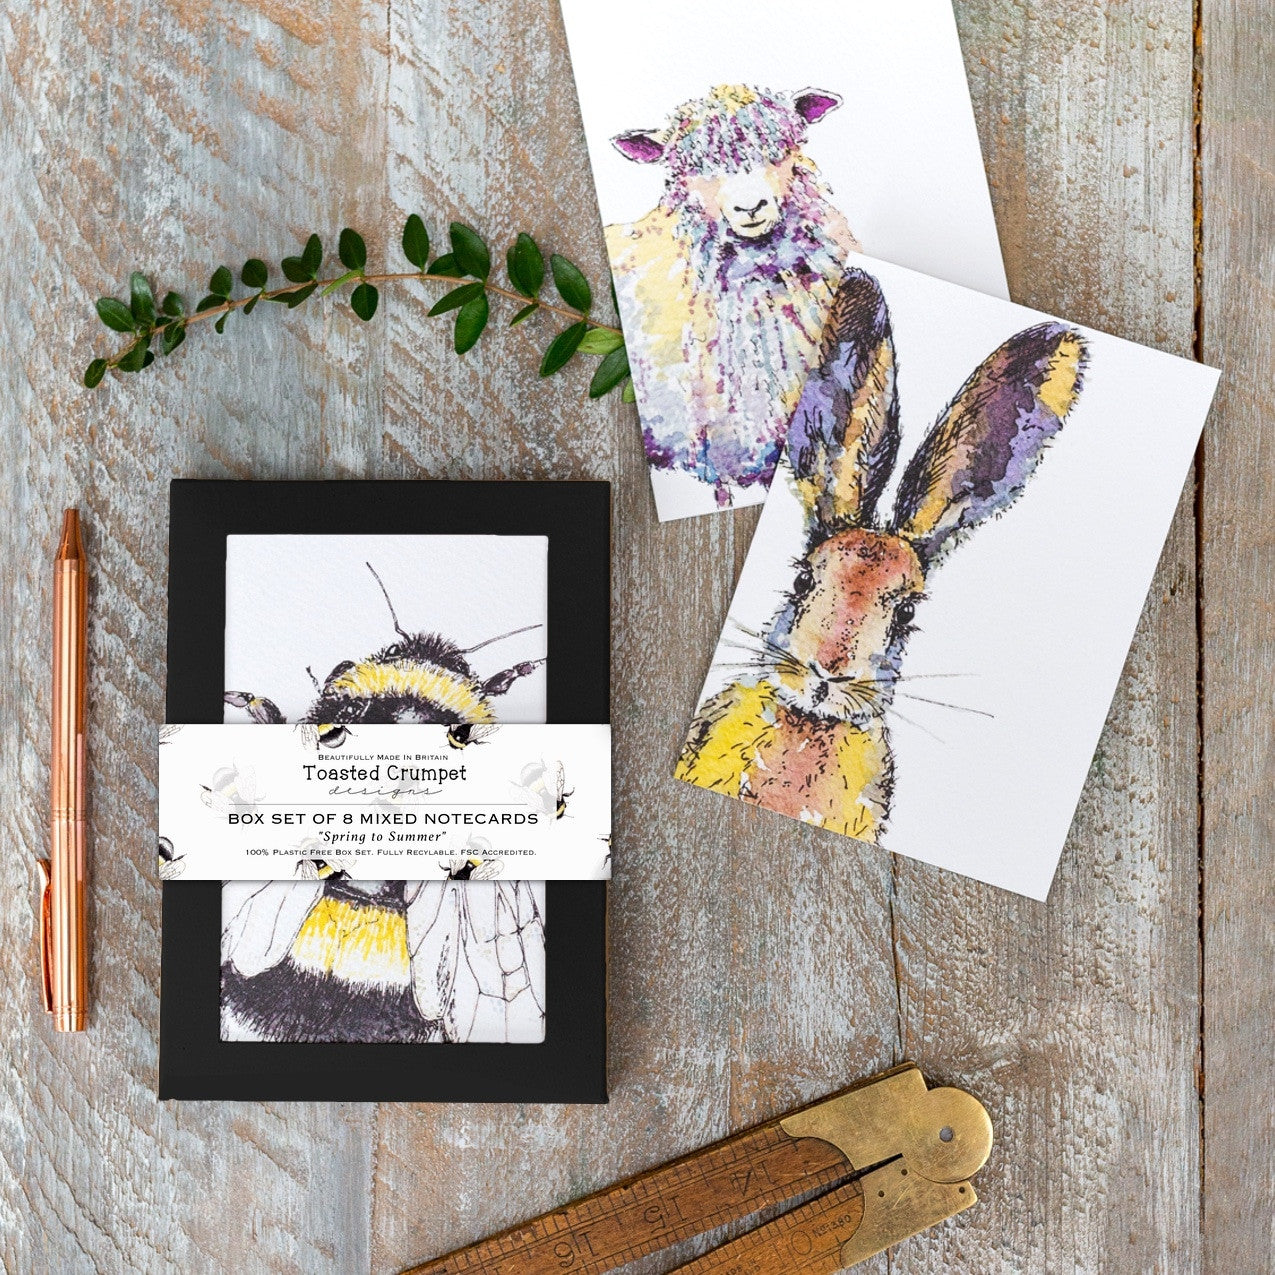 Spring to Summer Boxed Set of 8 Notecards by Toasted Crumpet.